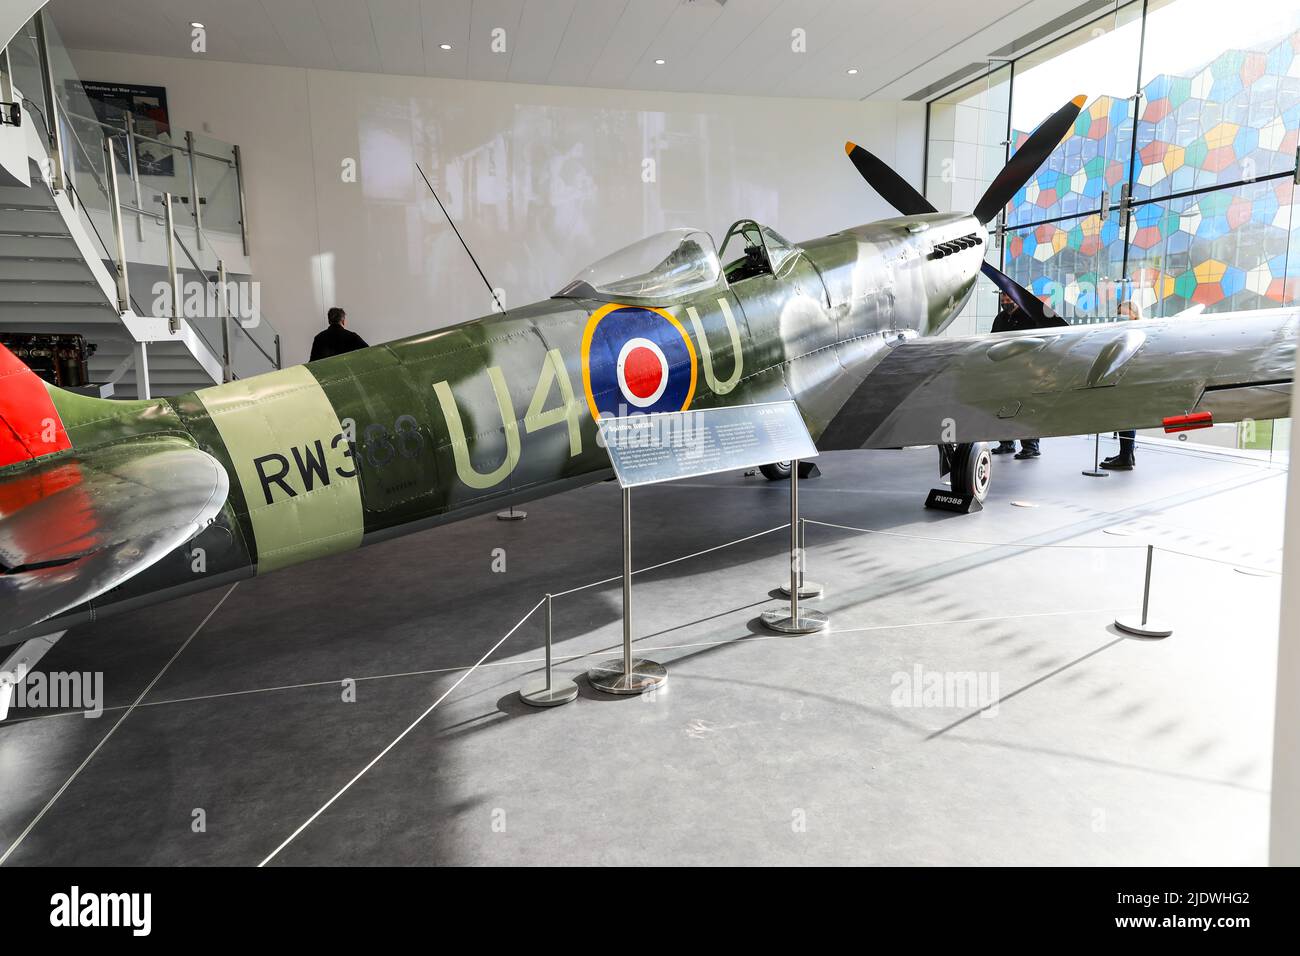 Spitfire RW388 aereo in mostra al Potteries Museum and Art Gallery, Hanley, Stoke-on-Trent, Staffs, Inghilterra, REGNO UNITO Foto Stock